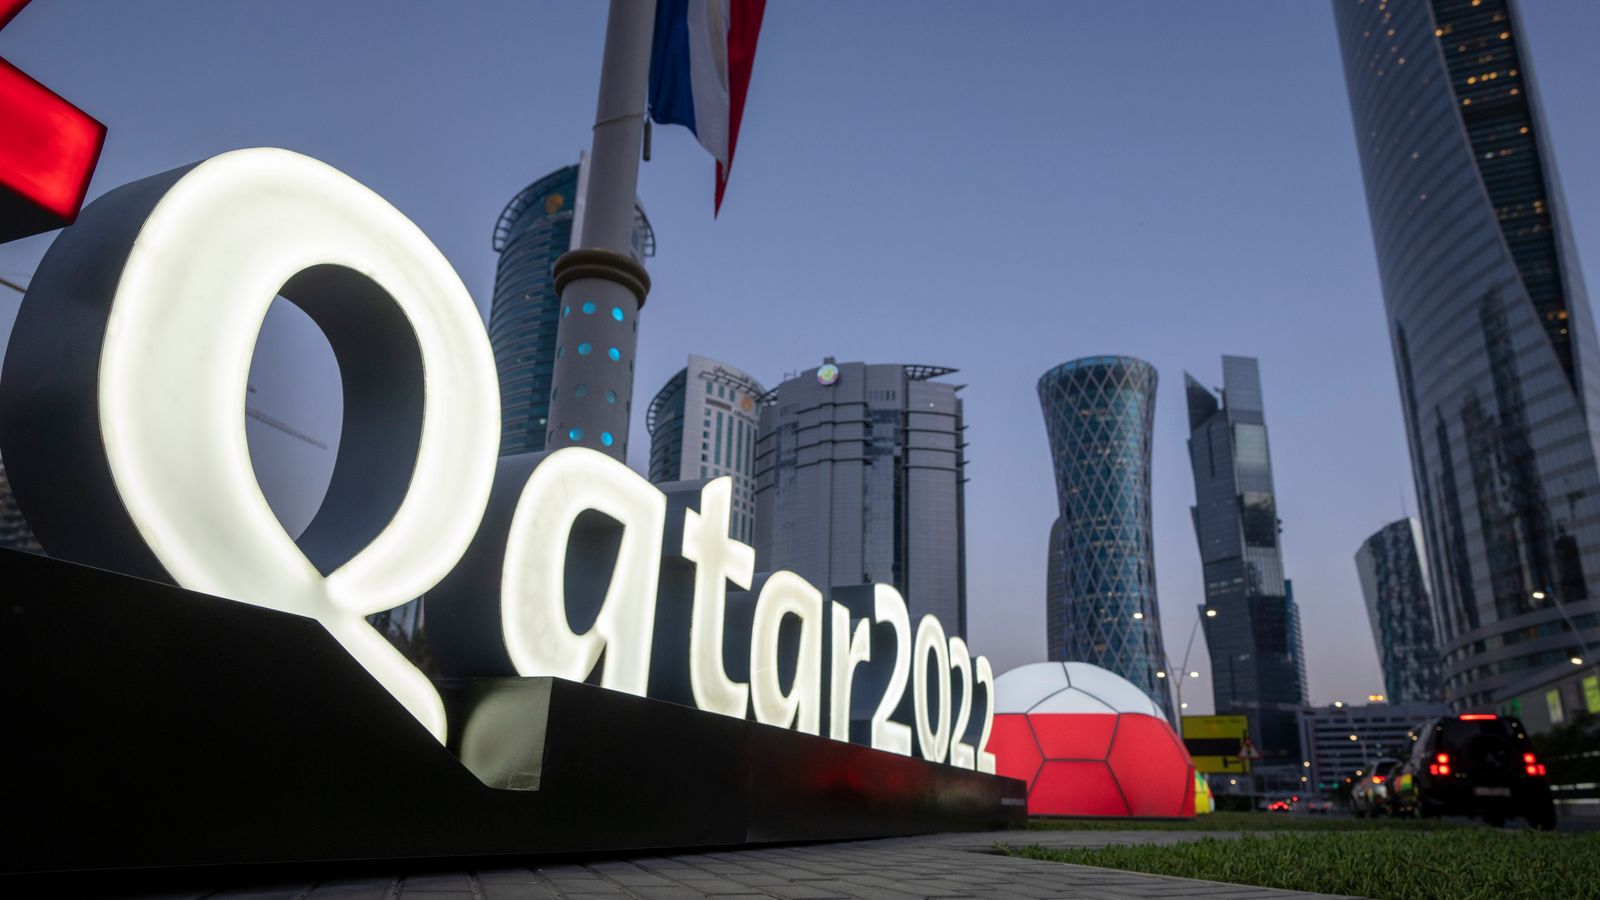 Qatar 'conscripting civilians and summoning diplomats from abroad' to bolster World Cup security